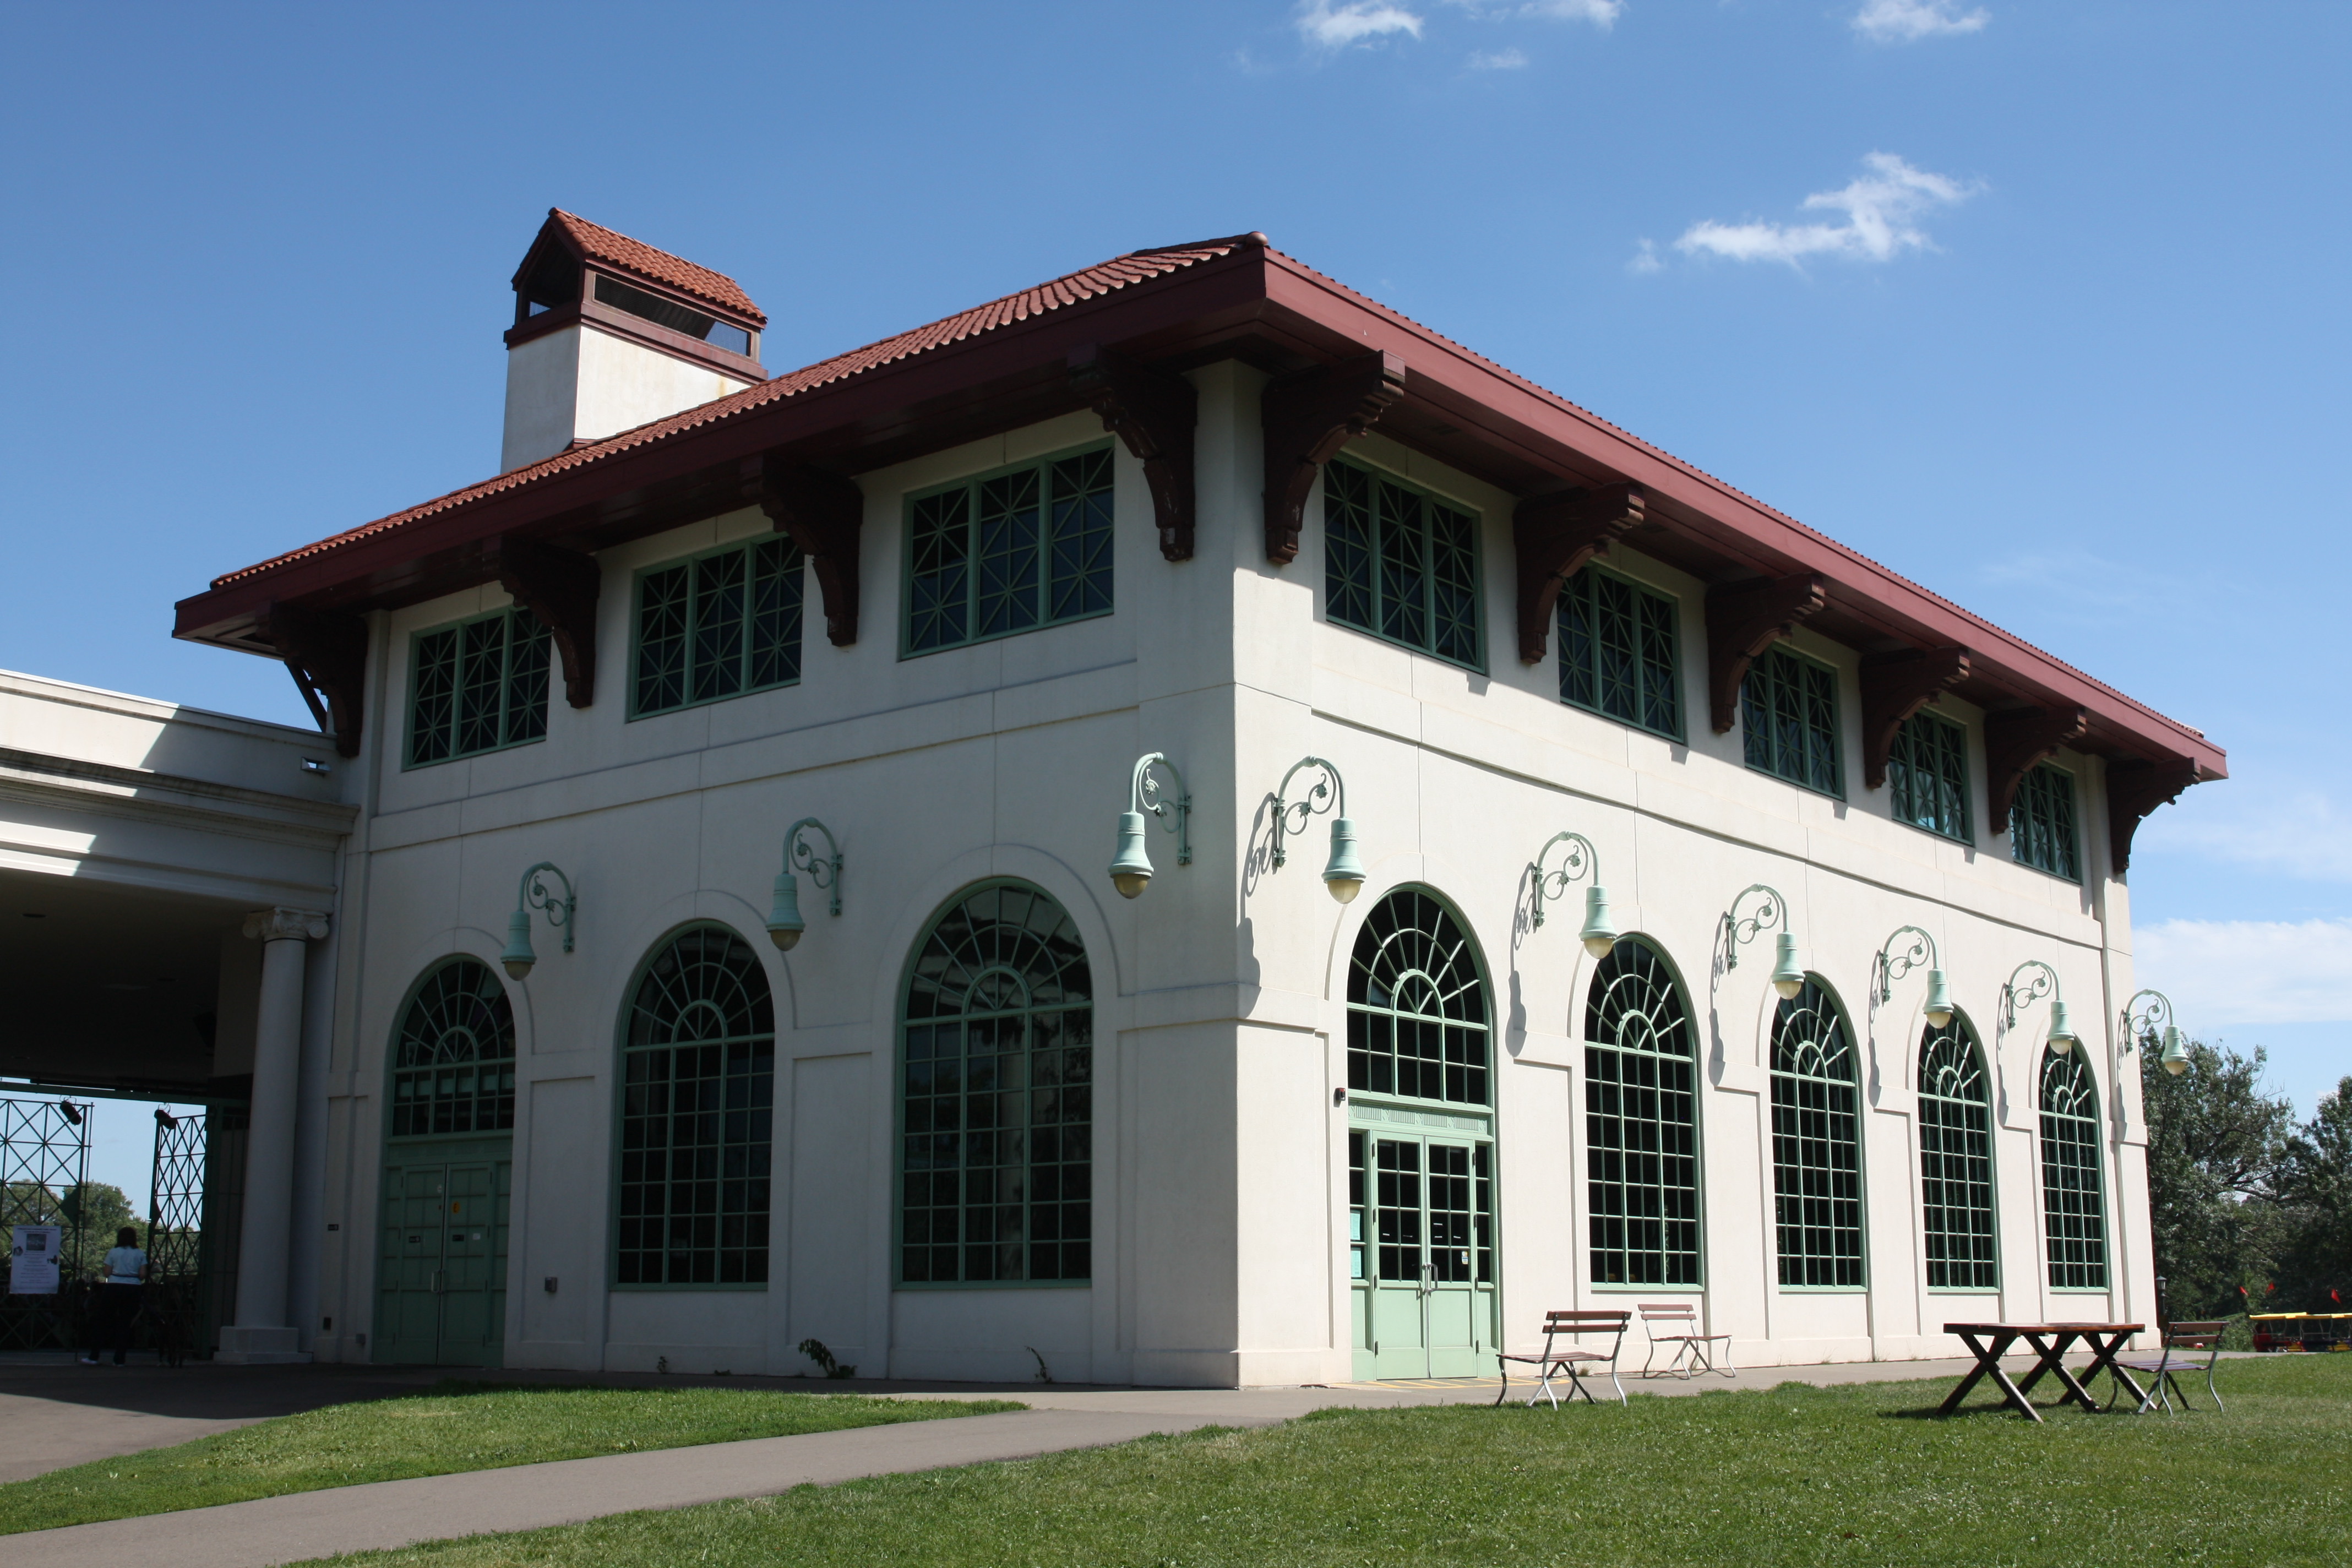 The Spring Cafe occupies the main floor of the Pavilion, and the second floor can be rented for weddings and other events.